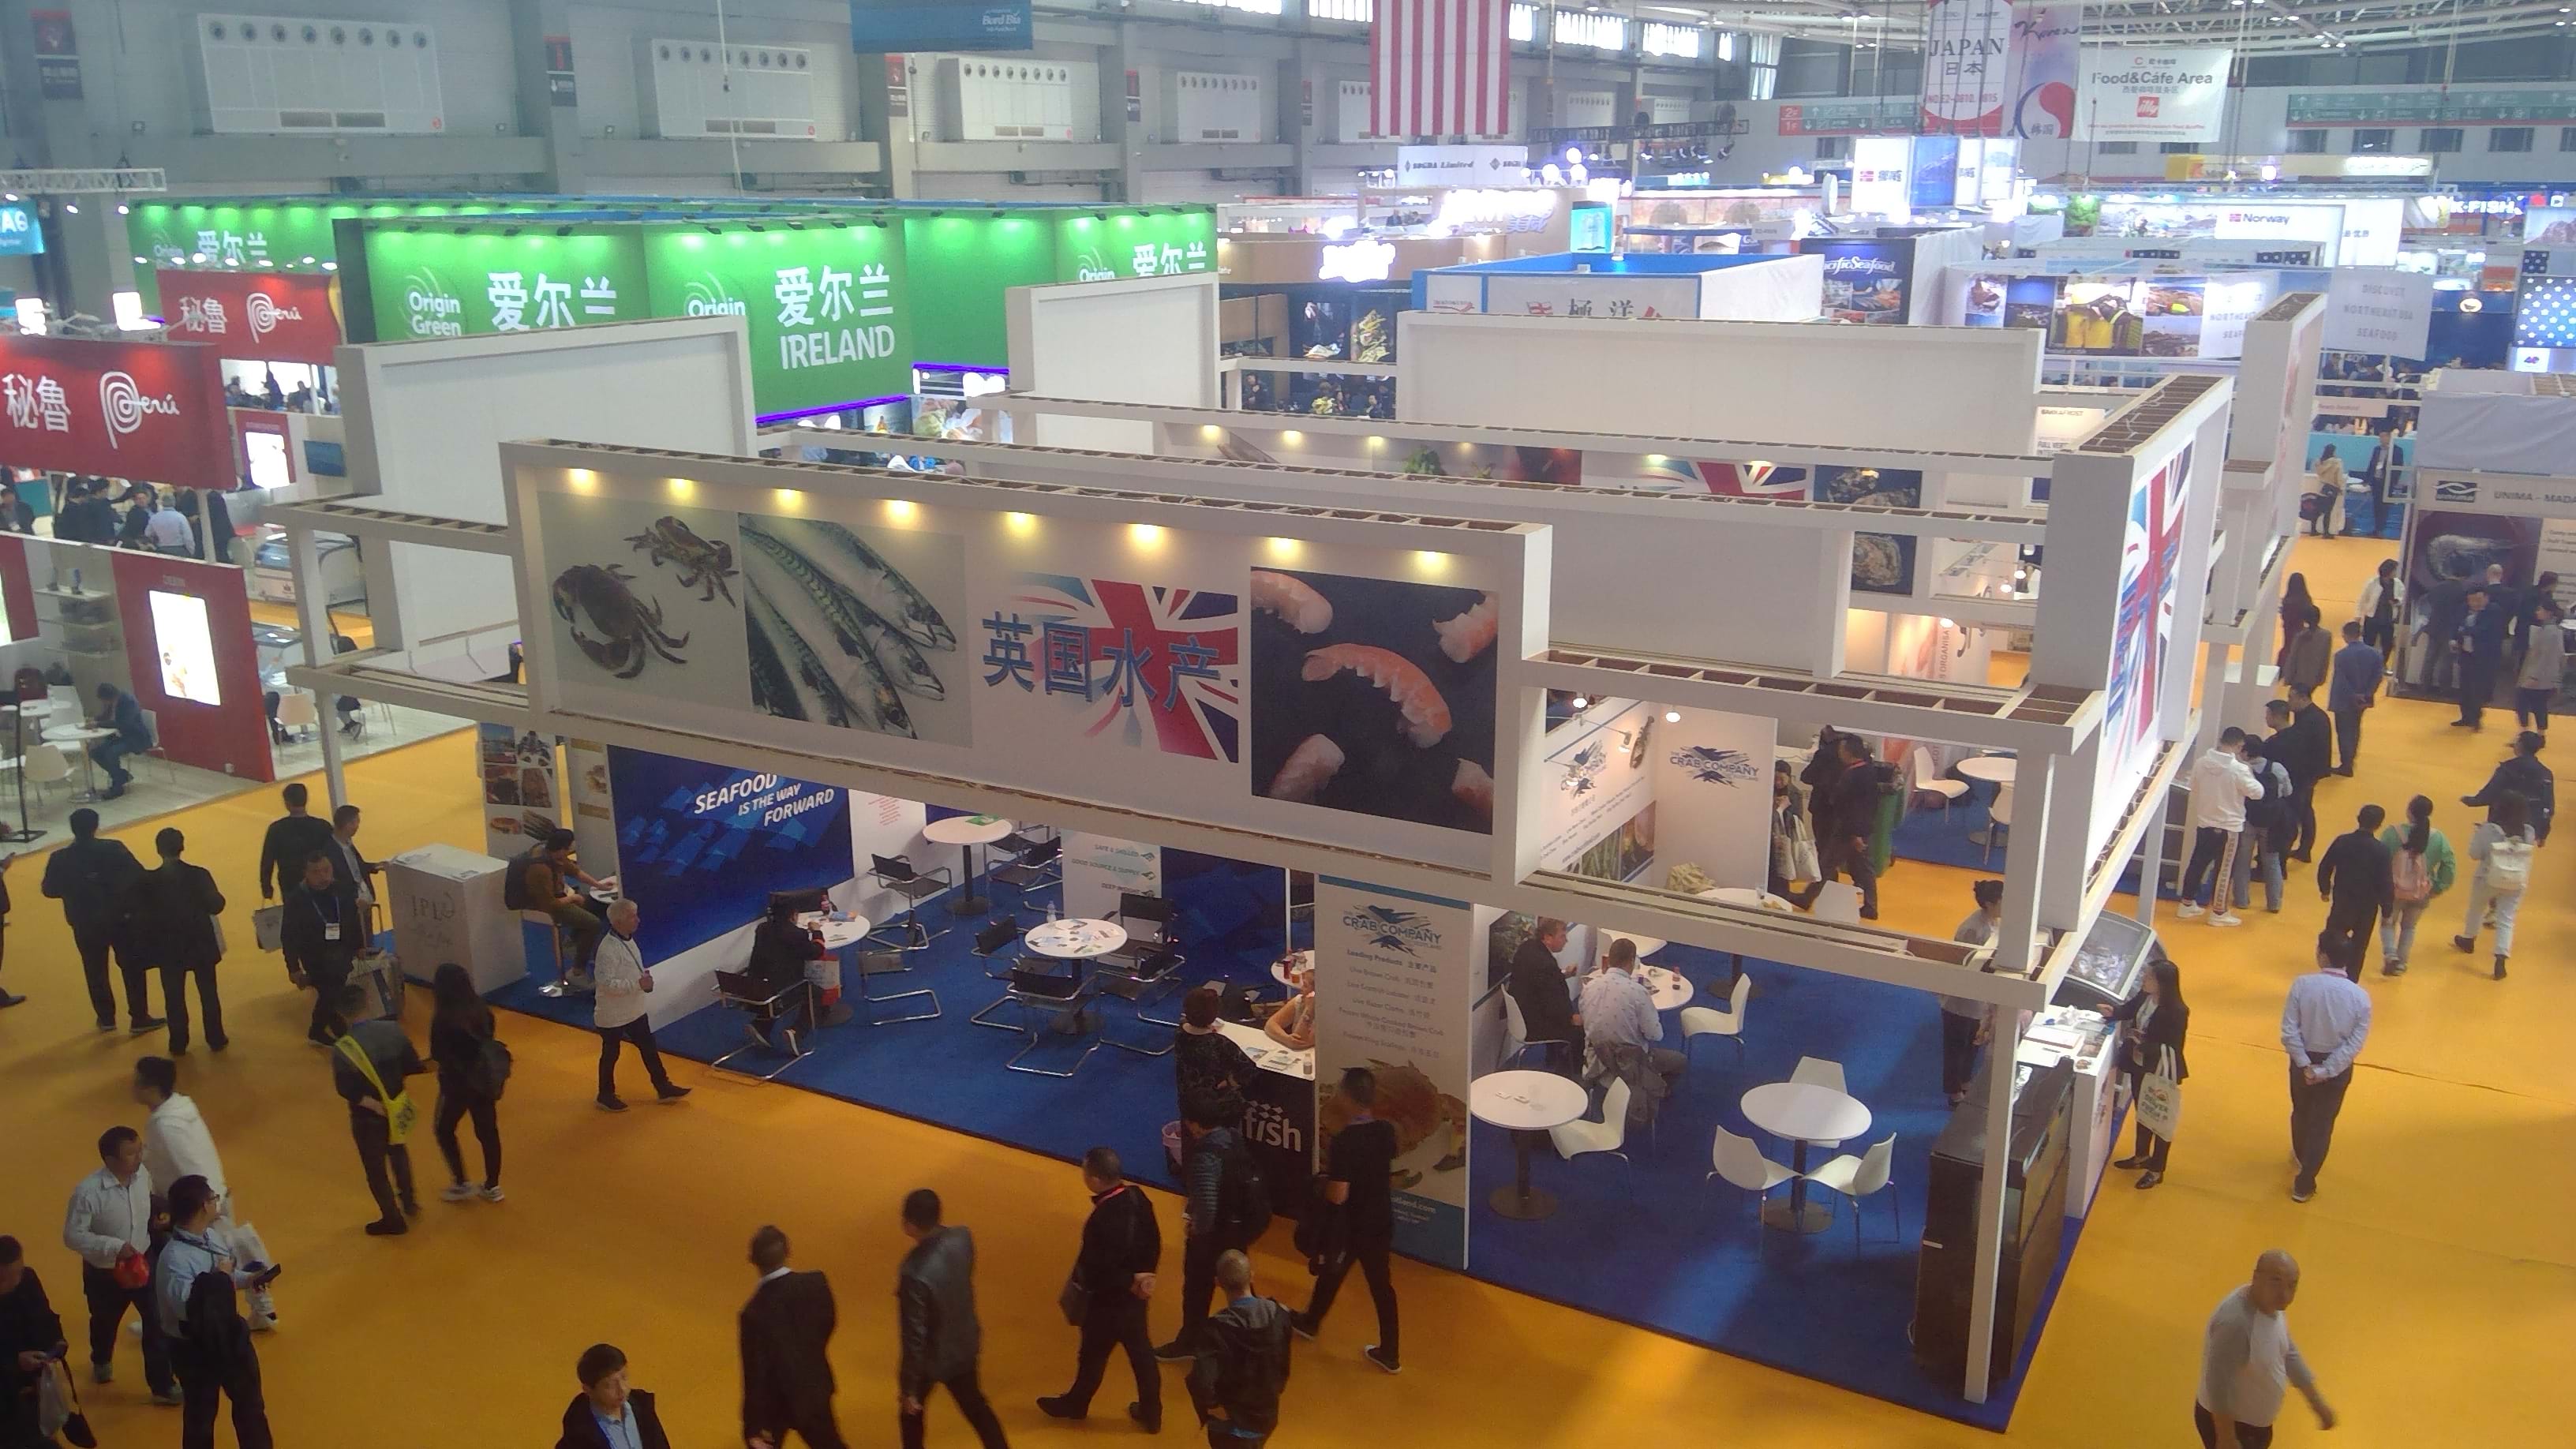 Photo shows a pavilion of exhibitors in a huge conference centre hall. There is a Union Jack flag and images of fish on the display.